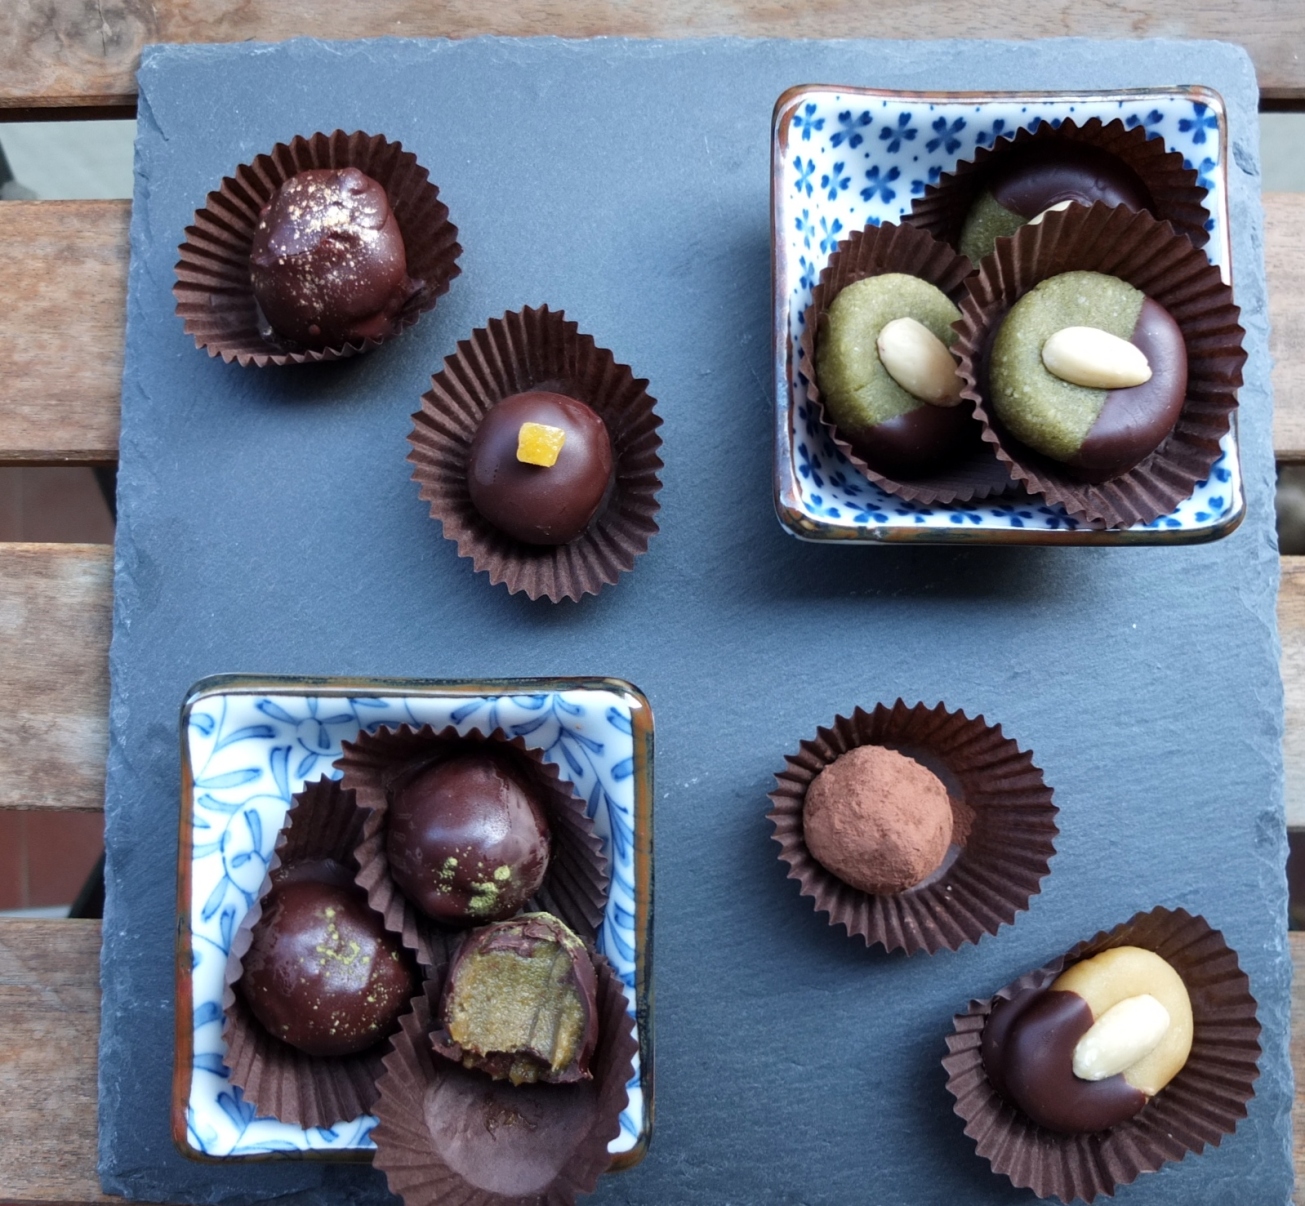 A variety of healthier marzipans and caramels